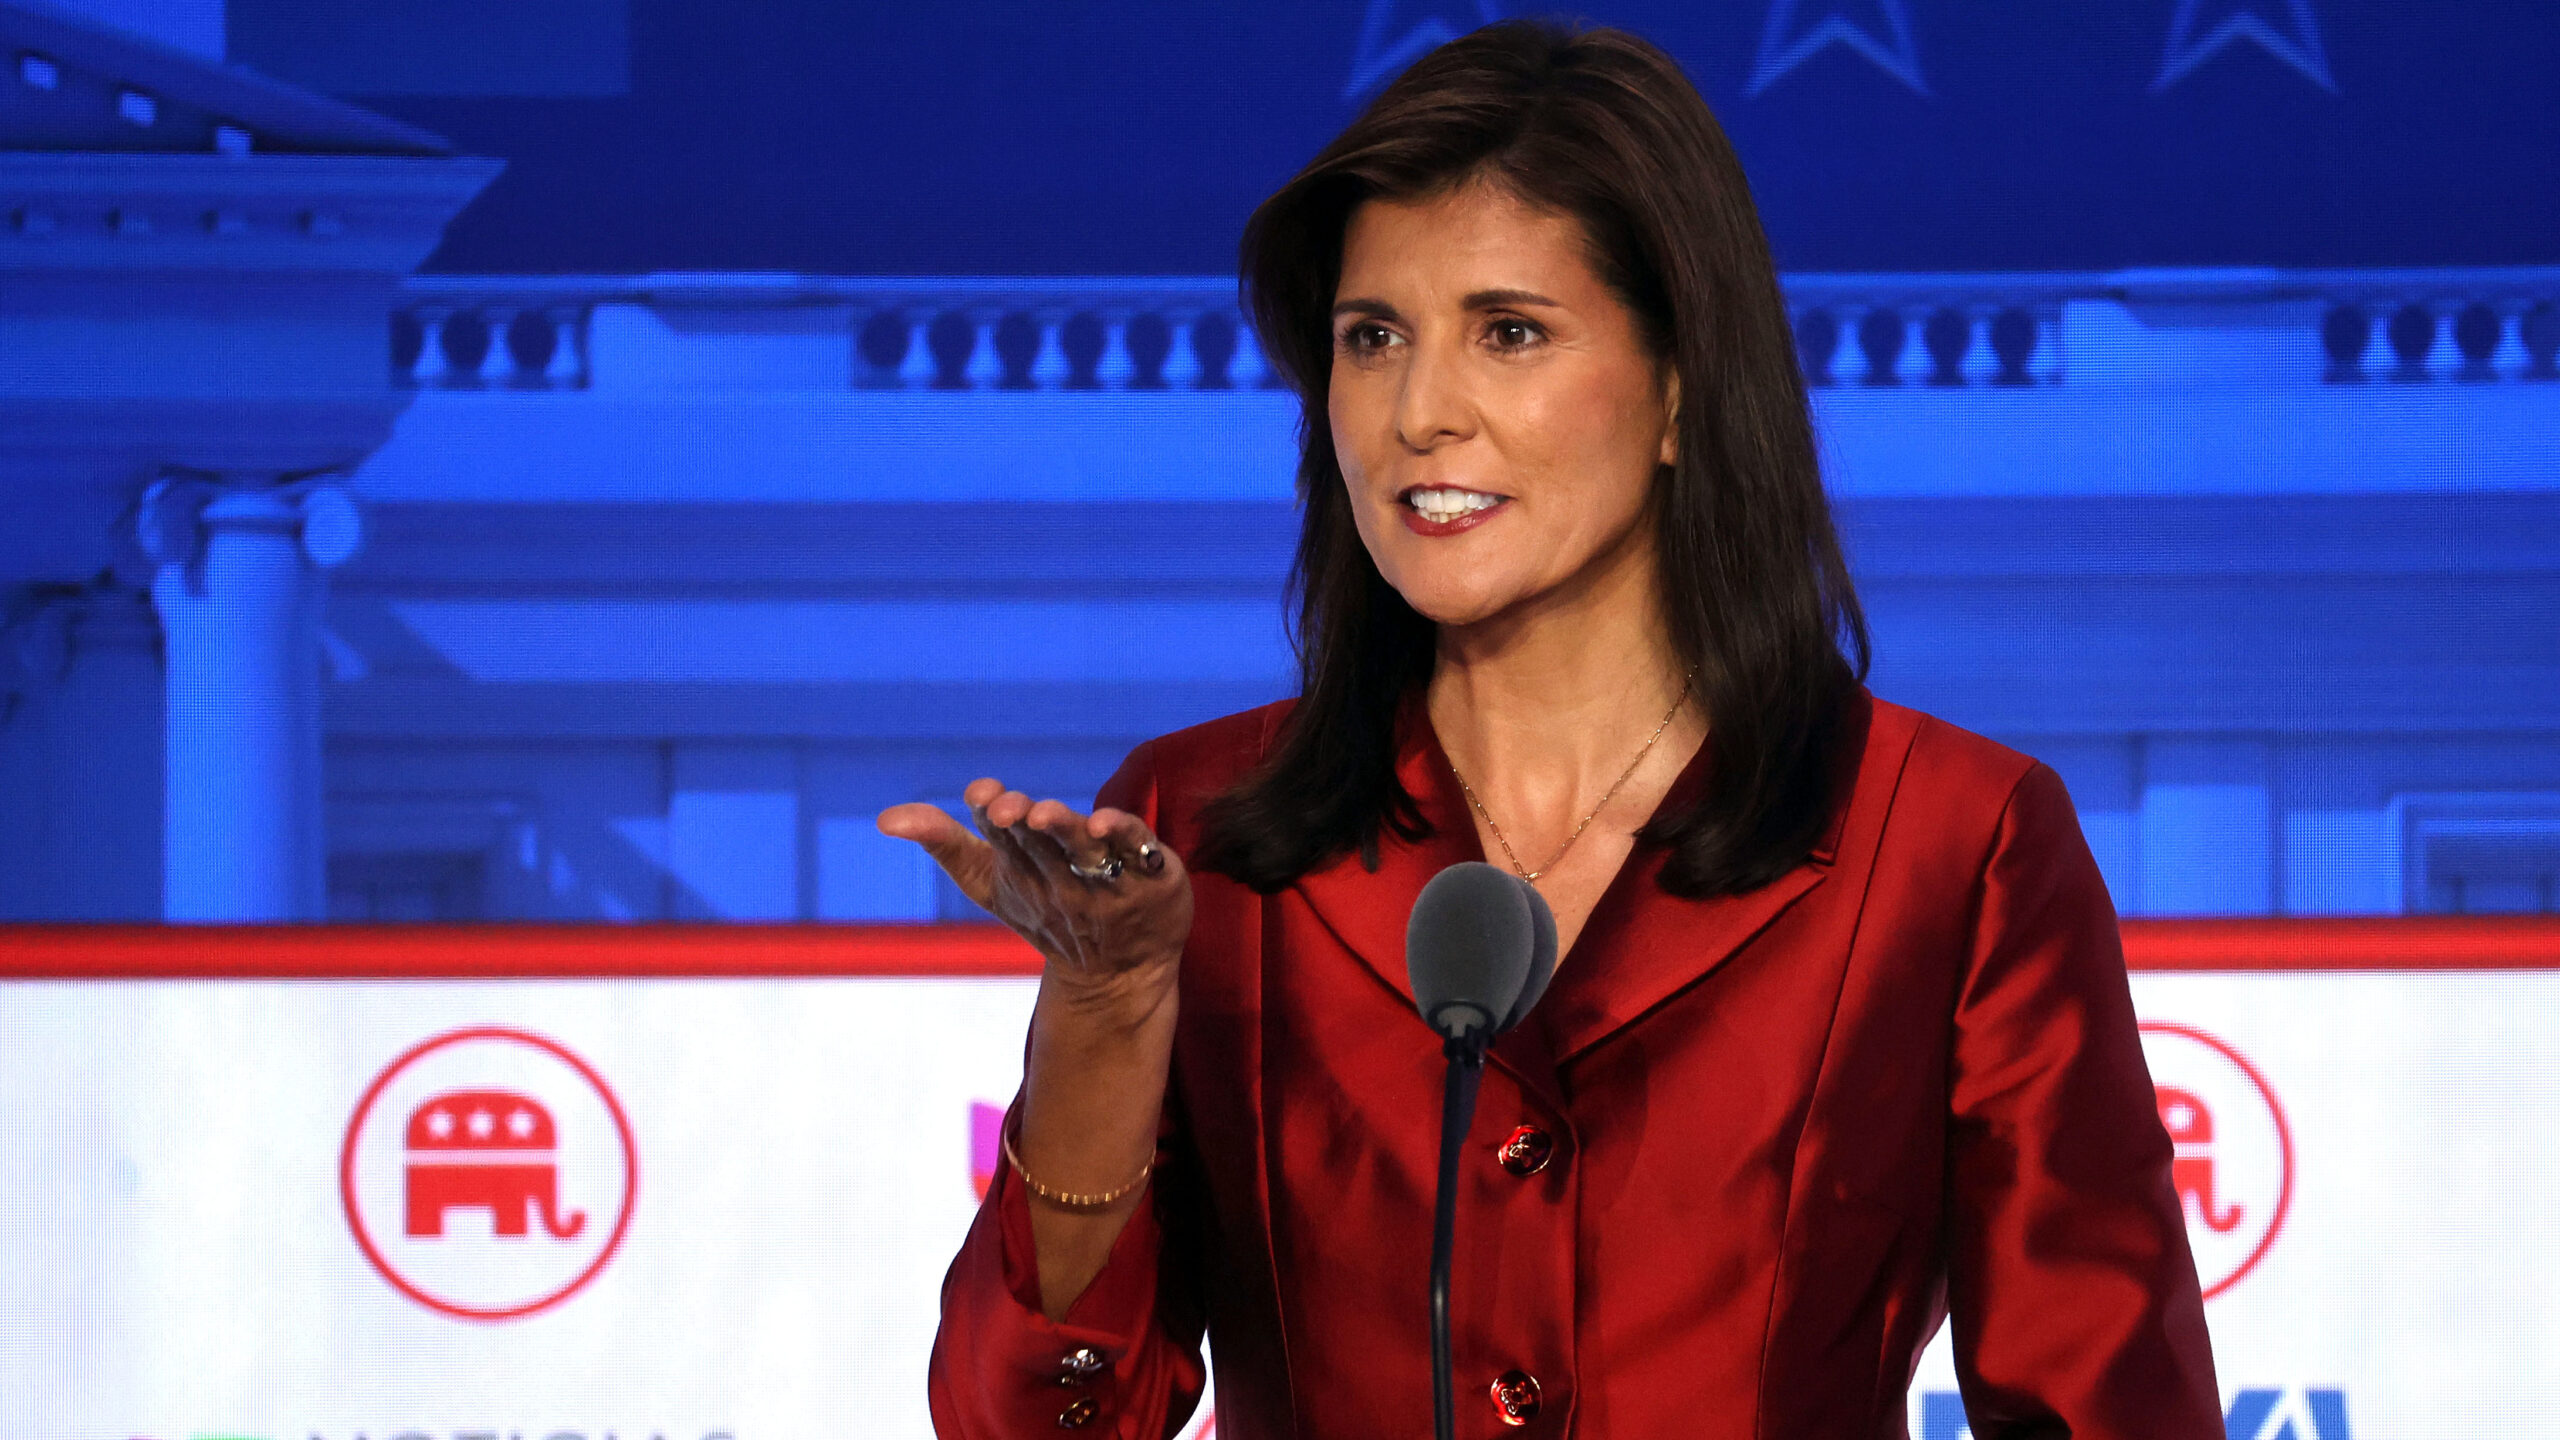 Nikki Haley: Terror Attacks on Israel are an Assault on America, Hamas Must be Defeated.